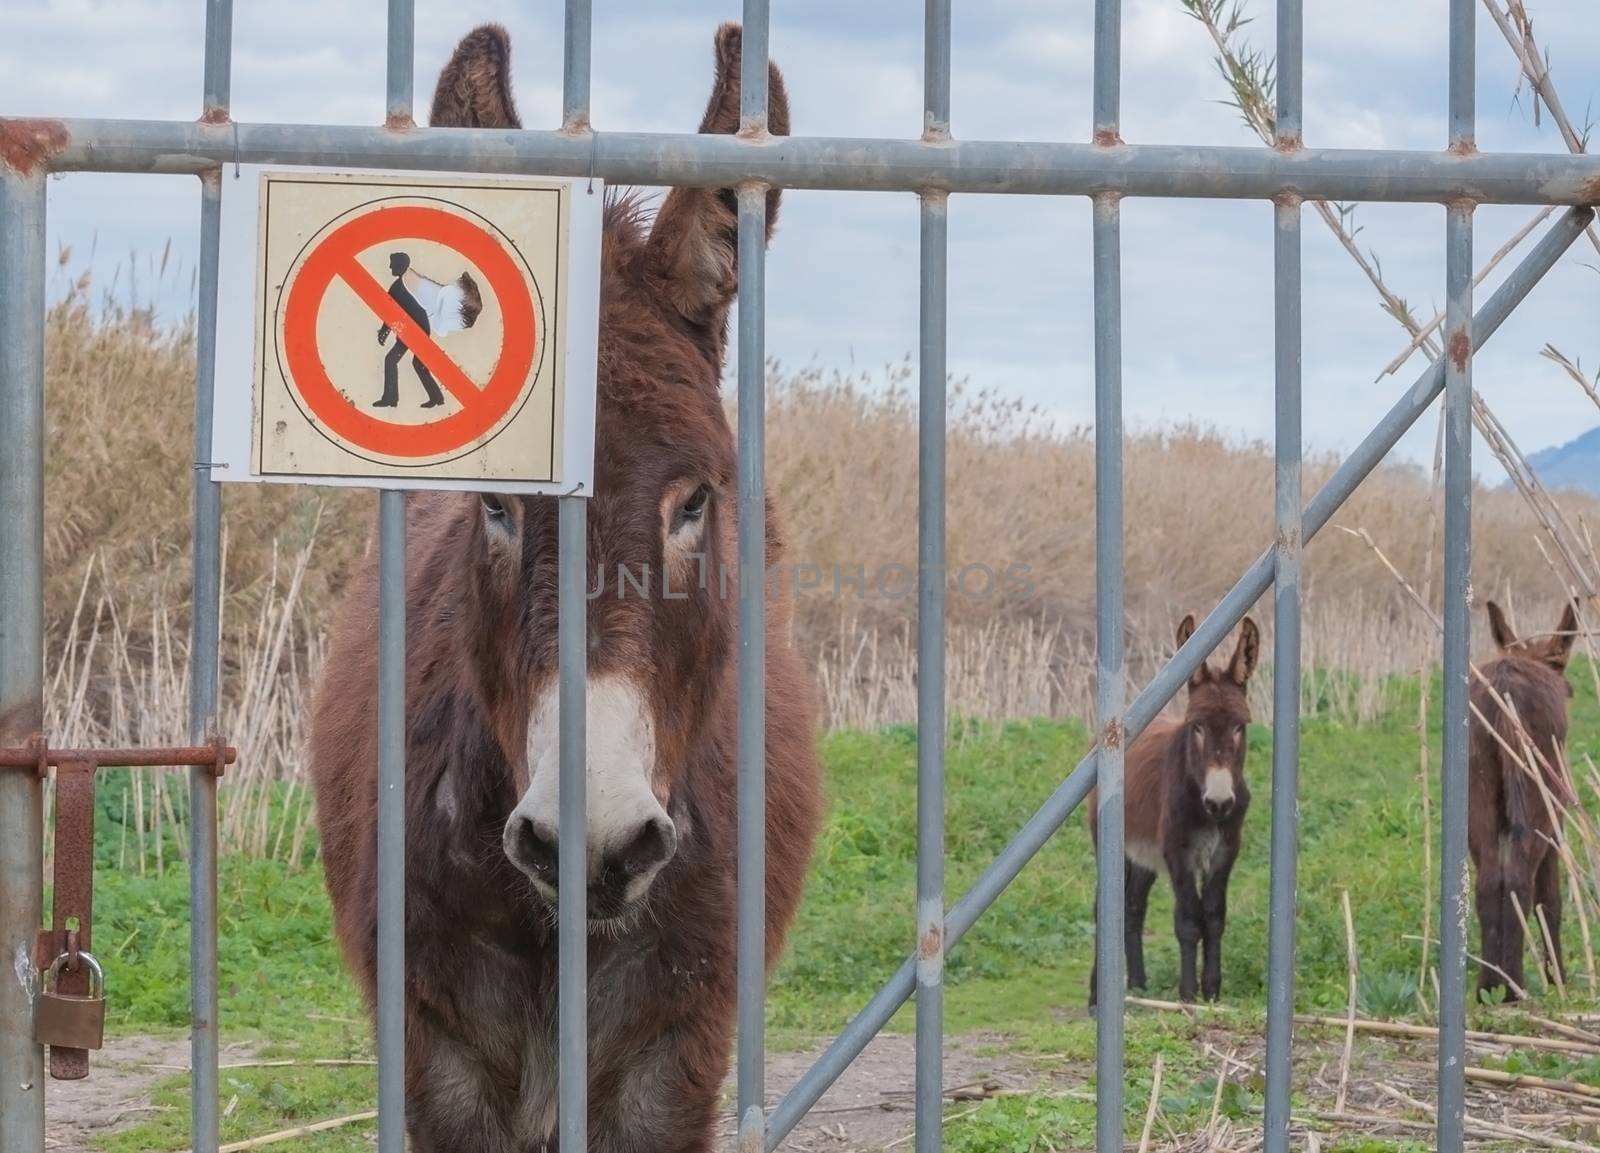 Donkey with warning sign. by ArtesiaWells